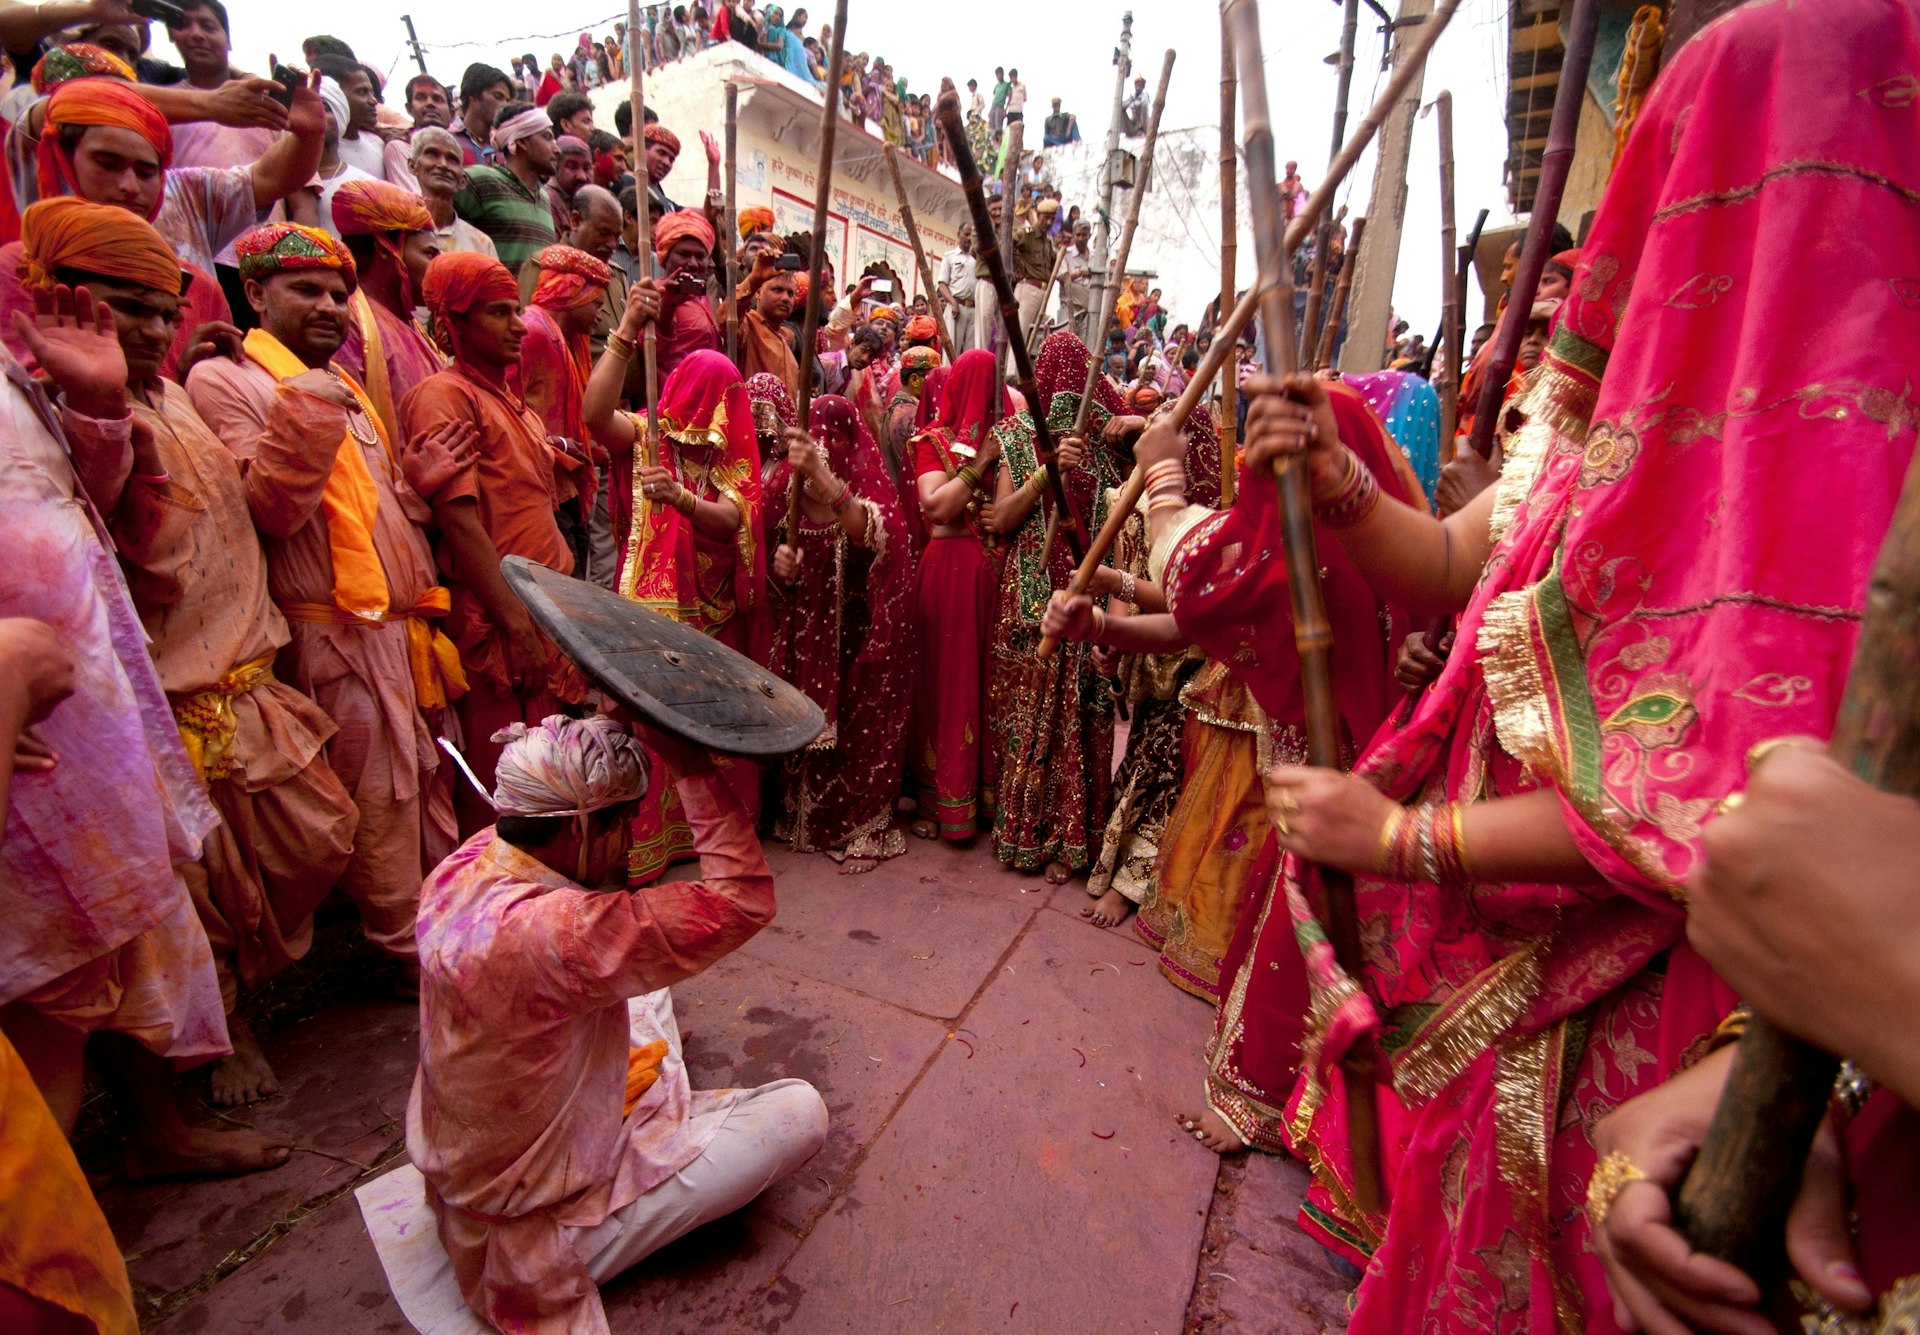 A group of women, all dressed in red saris, ceremoniously 'beat' a man, who cowers on the ground beneath a small shield, with large wooden sticks as part of Holi celebrations in India.